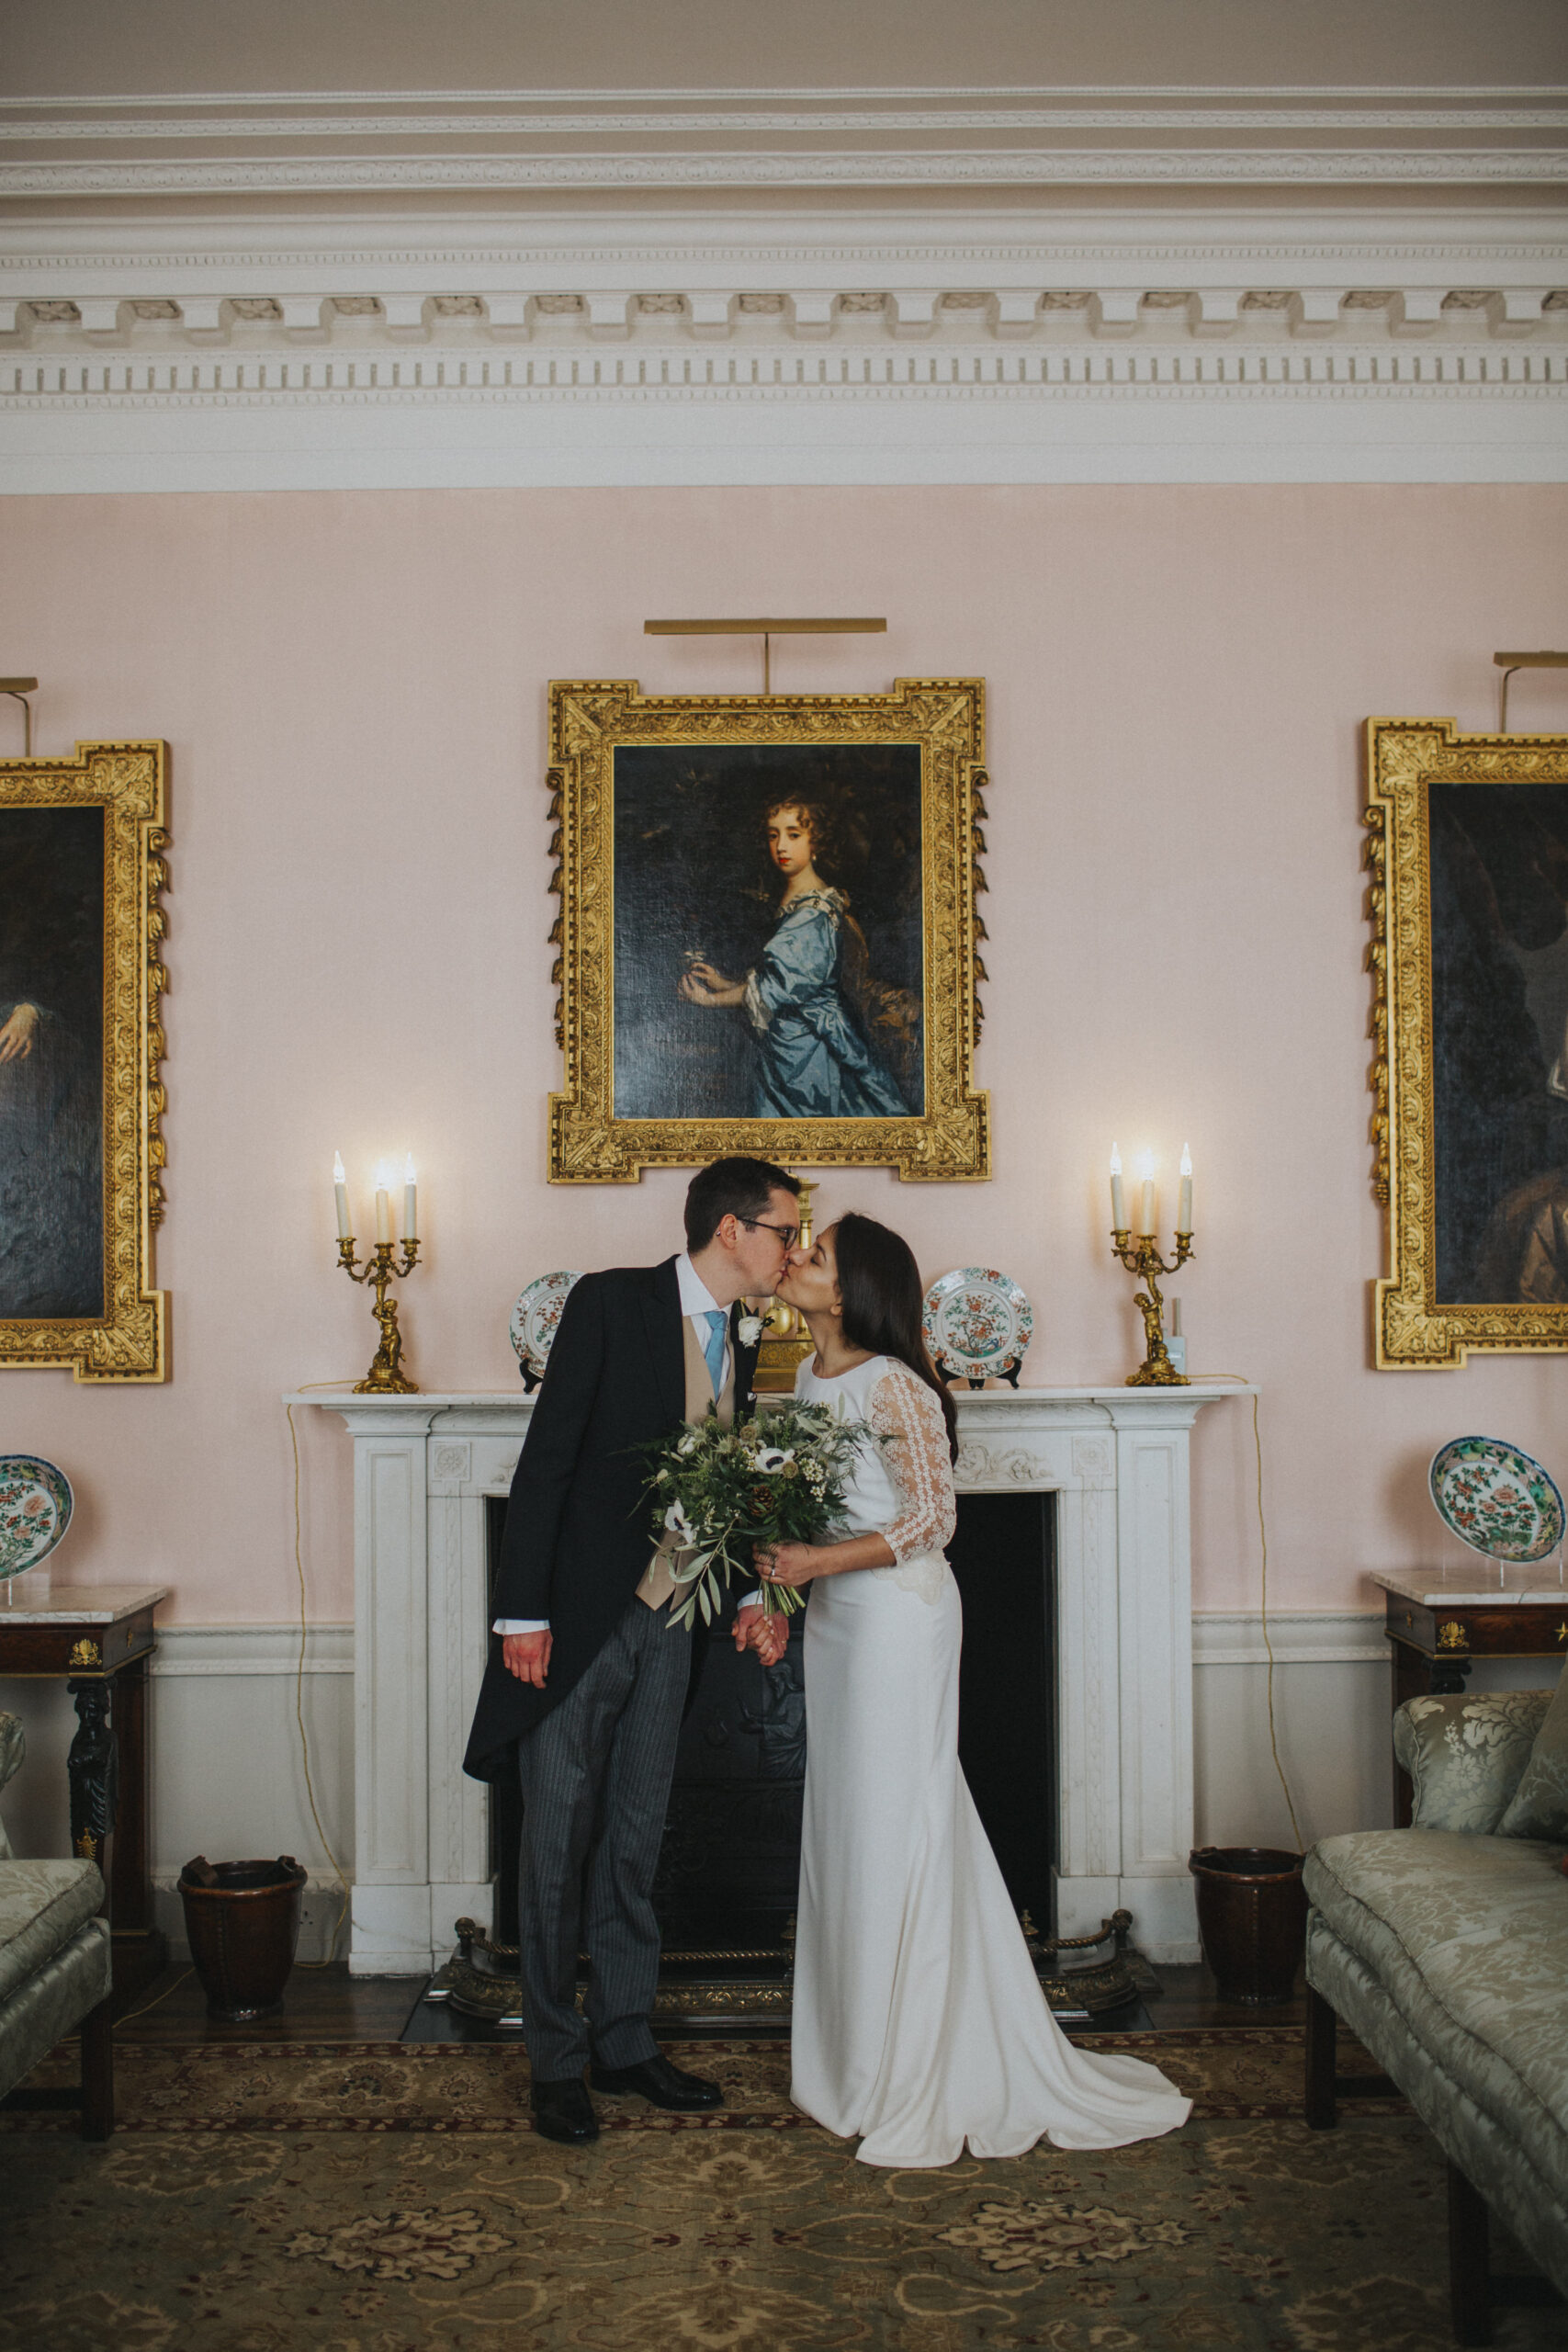 A garden of joy and love at Weston Park